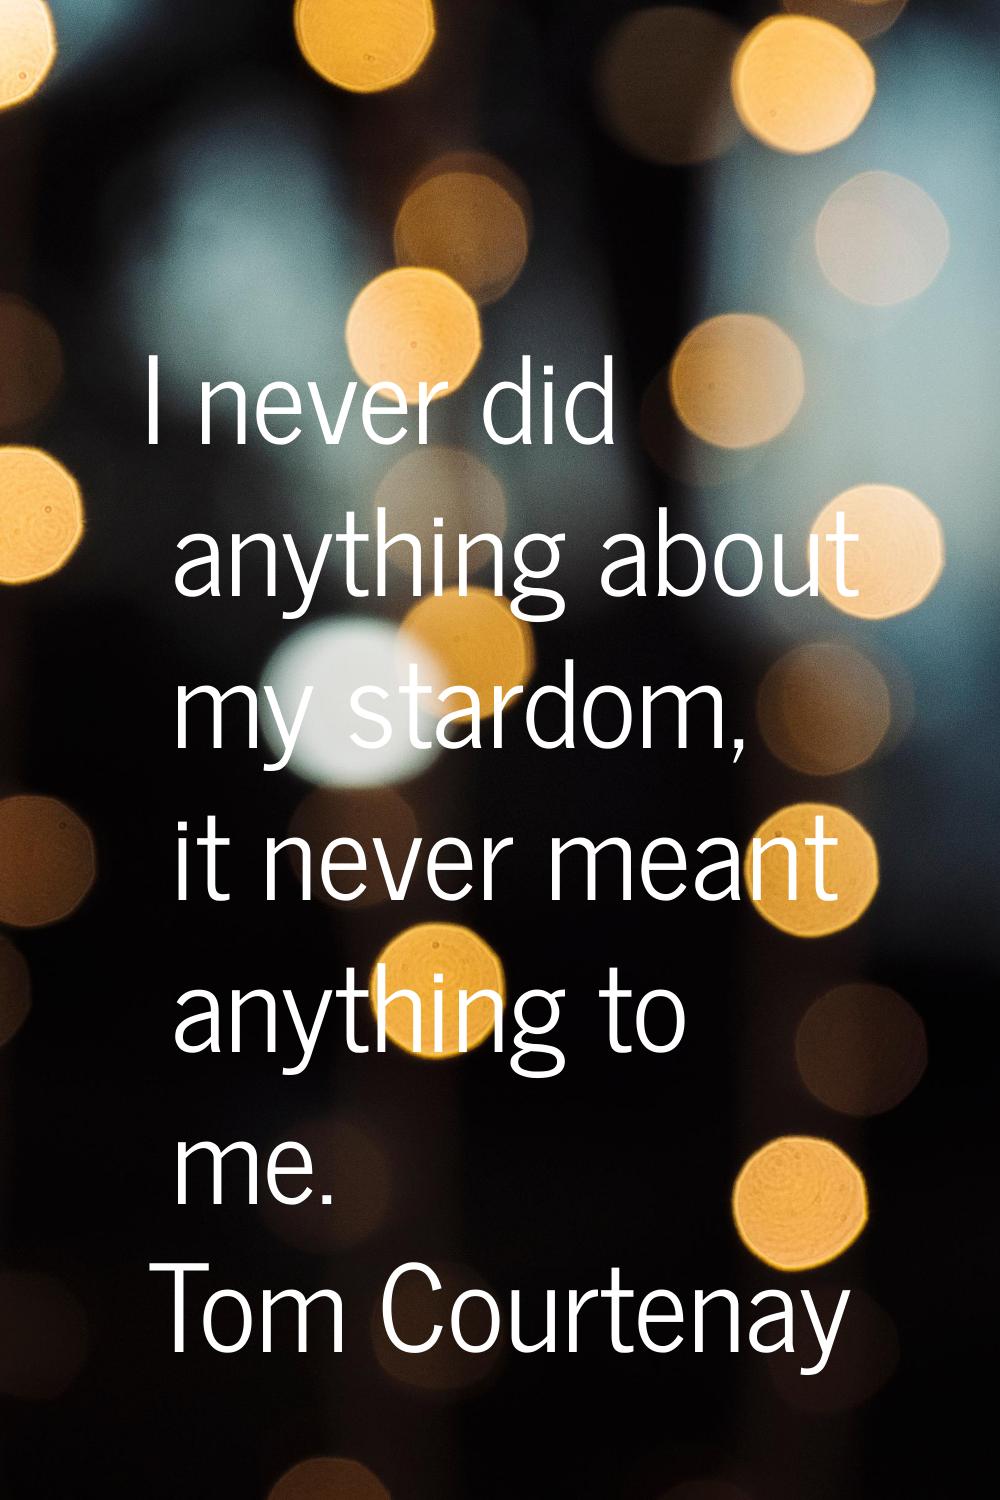 I never did anything about my stardom, it never meant anything to me.